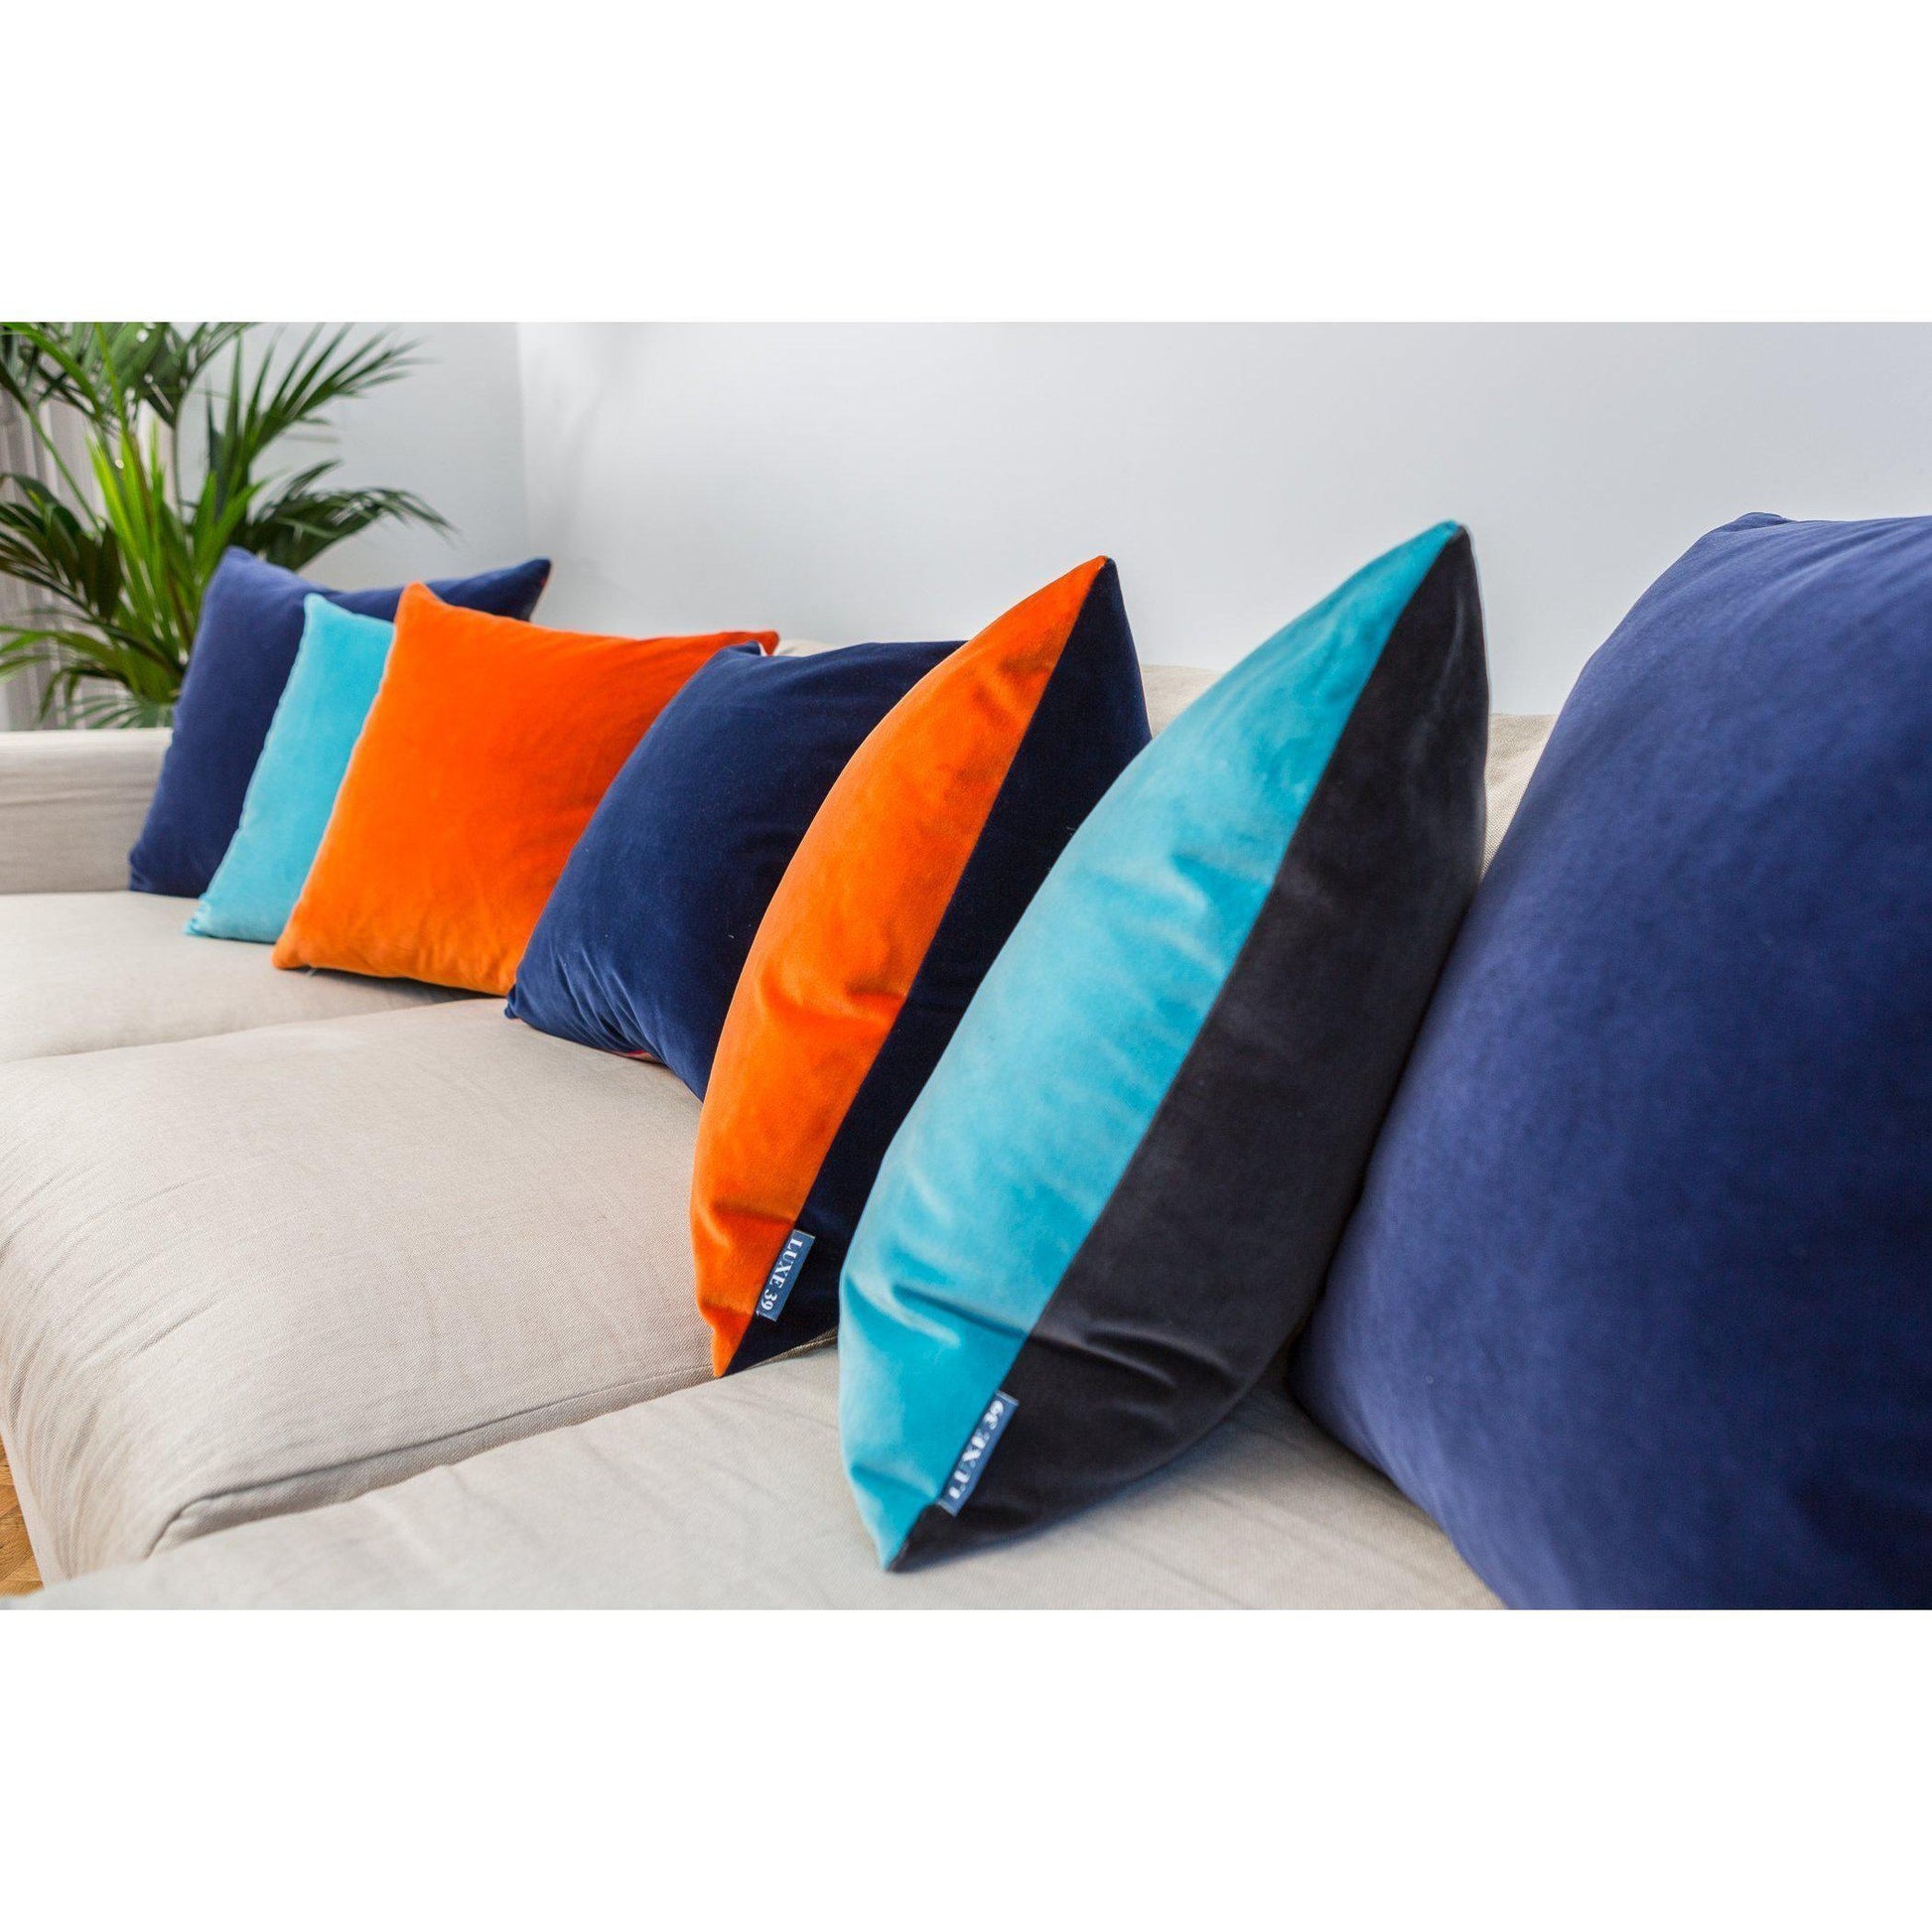 Turquoise Velvet Cushion with True Blue Luxe 39